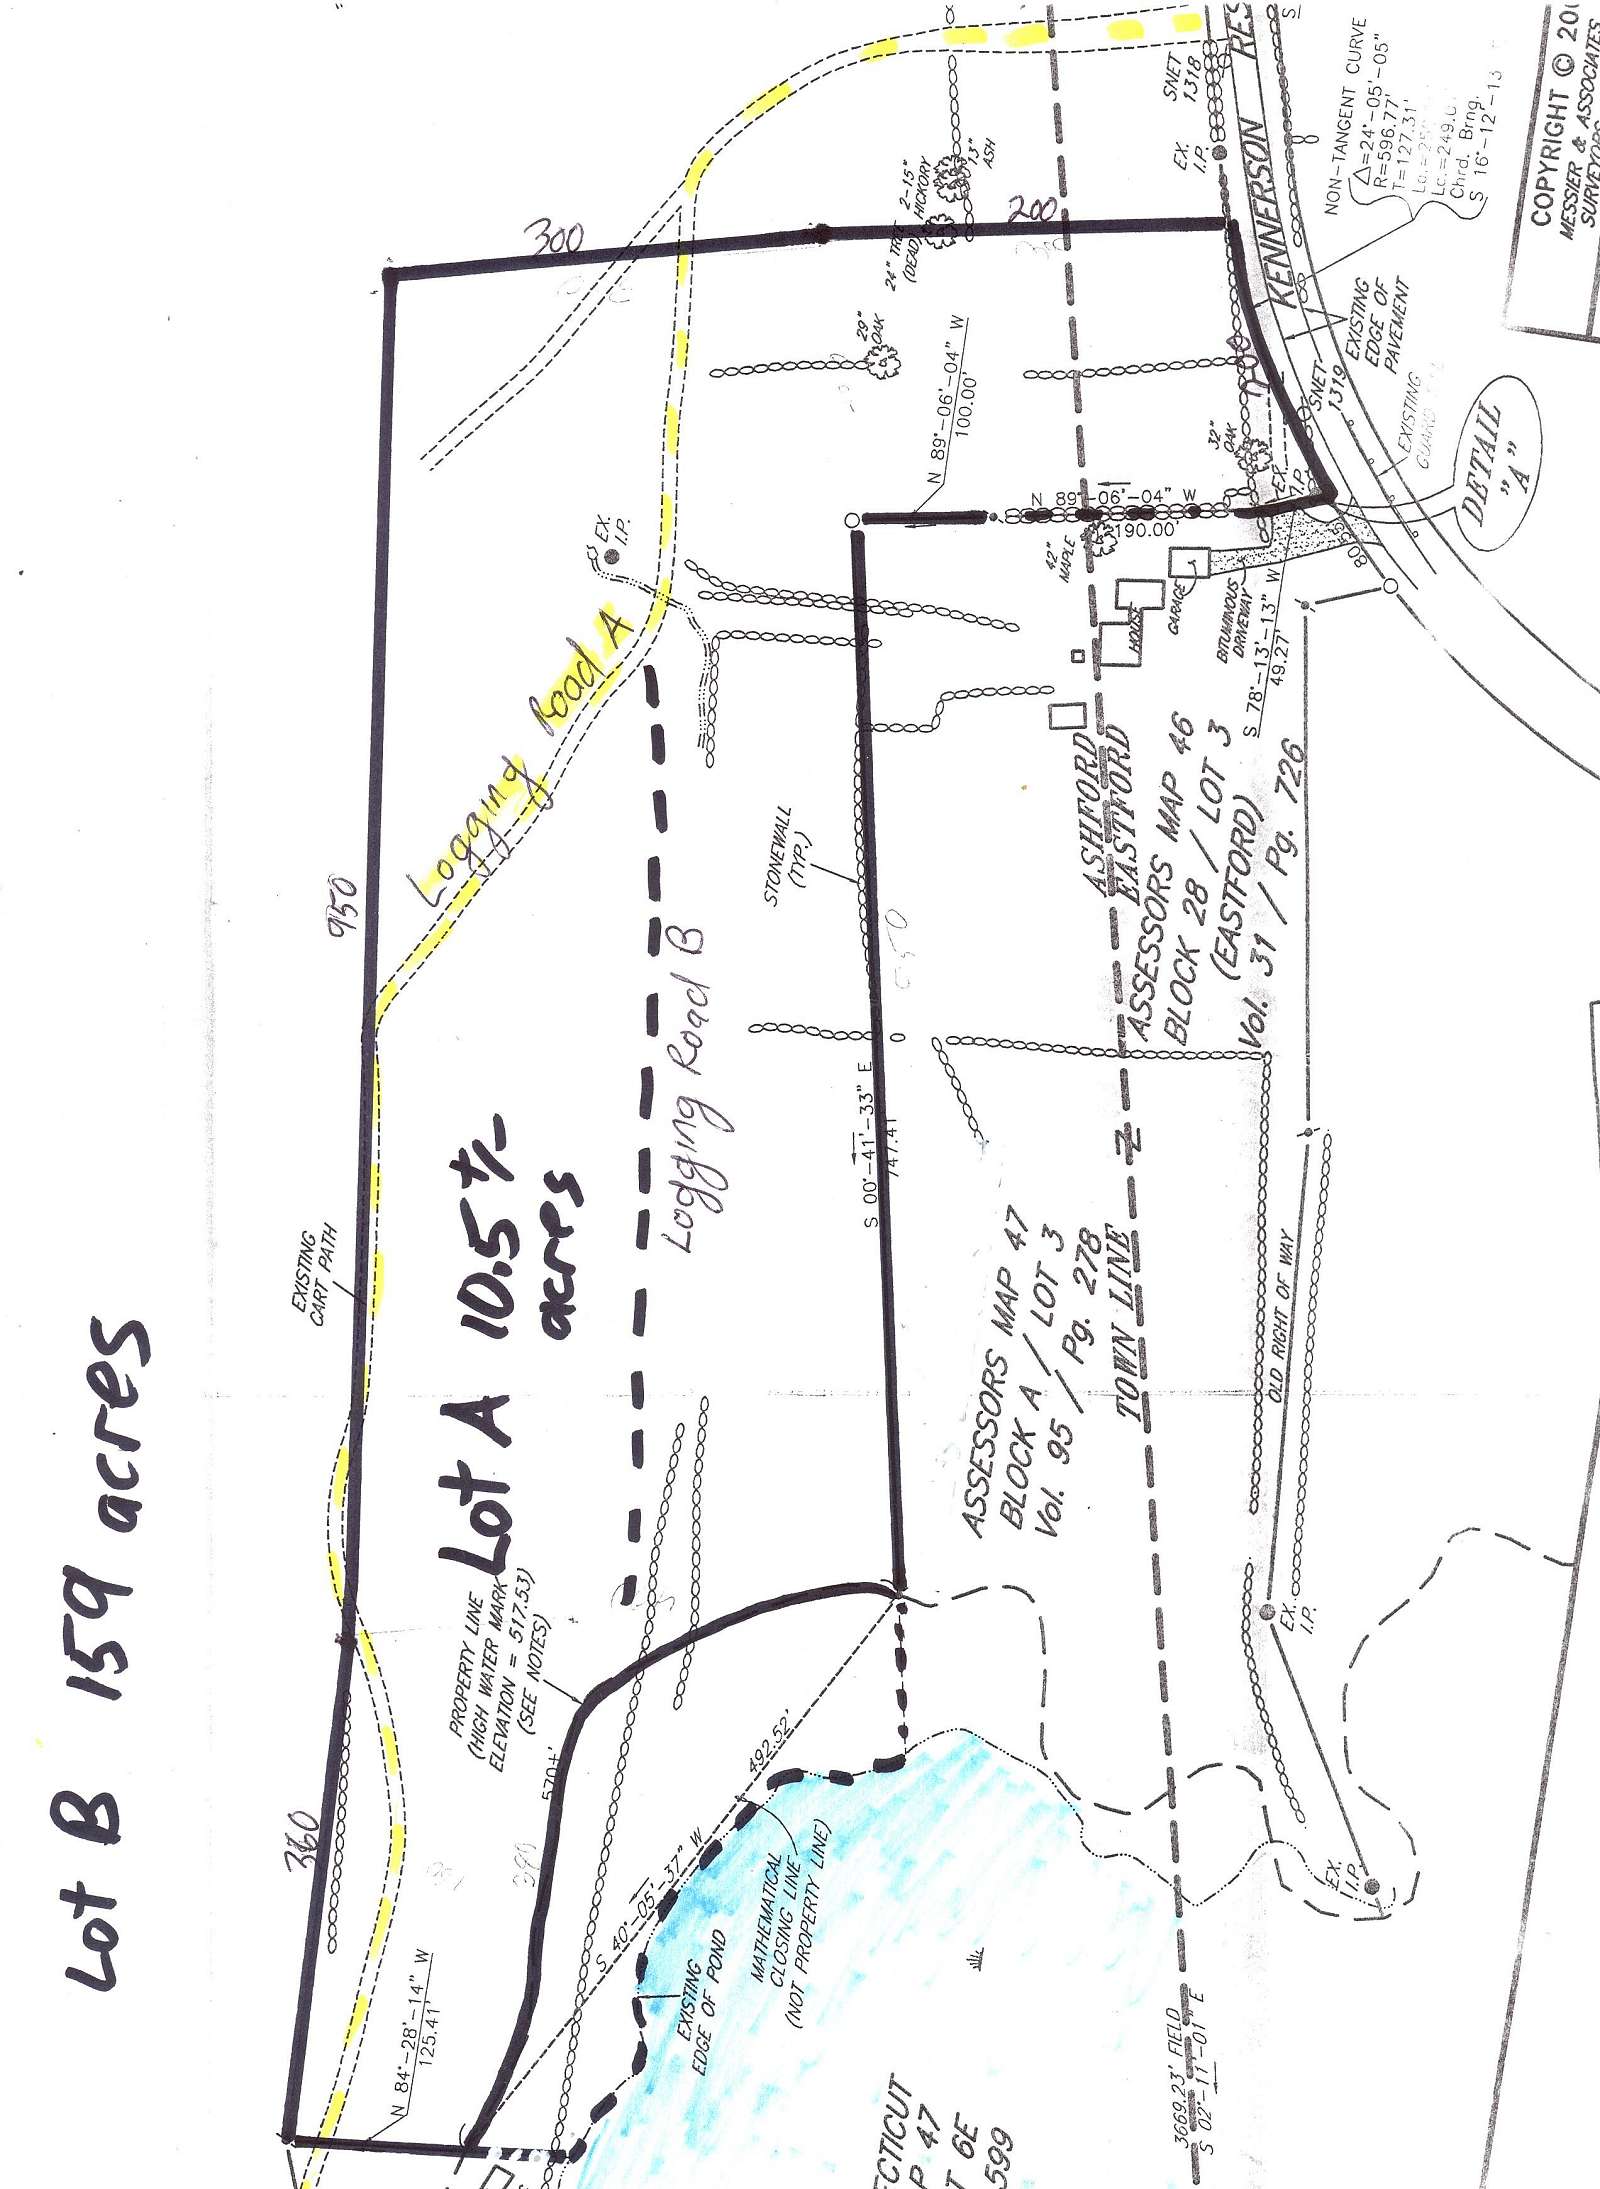 Large Lot layout map for 10.5 acre property.